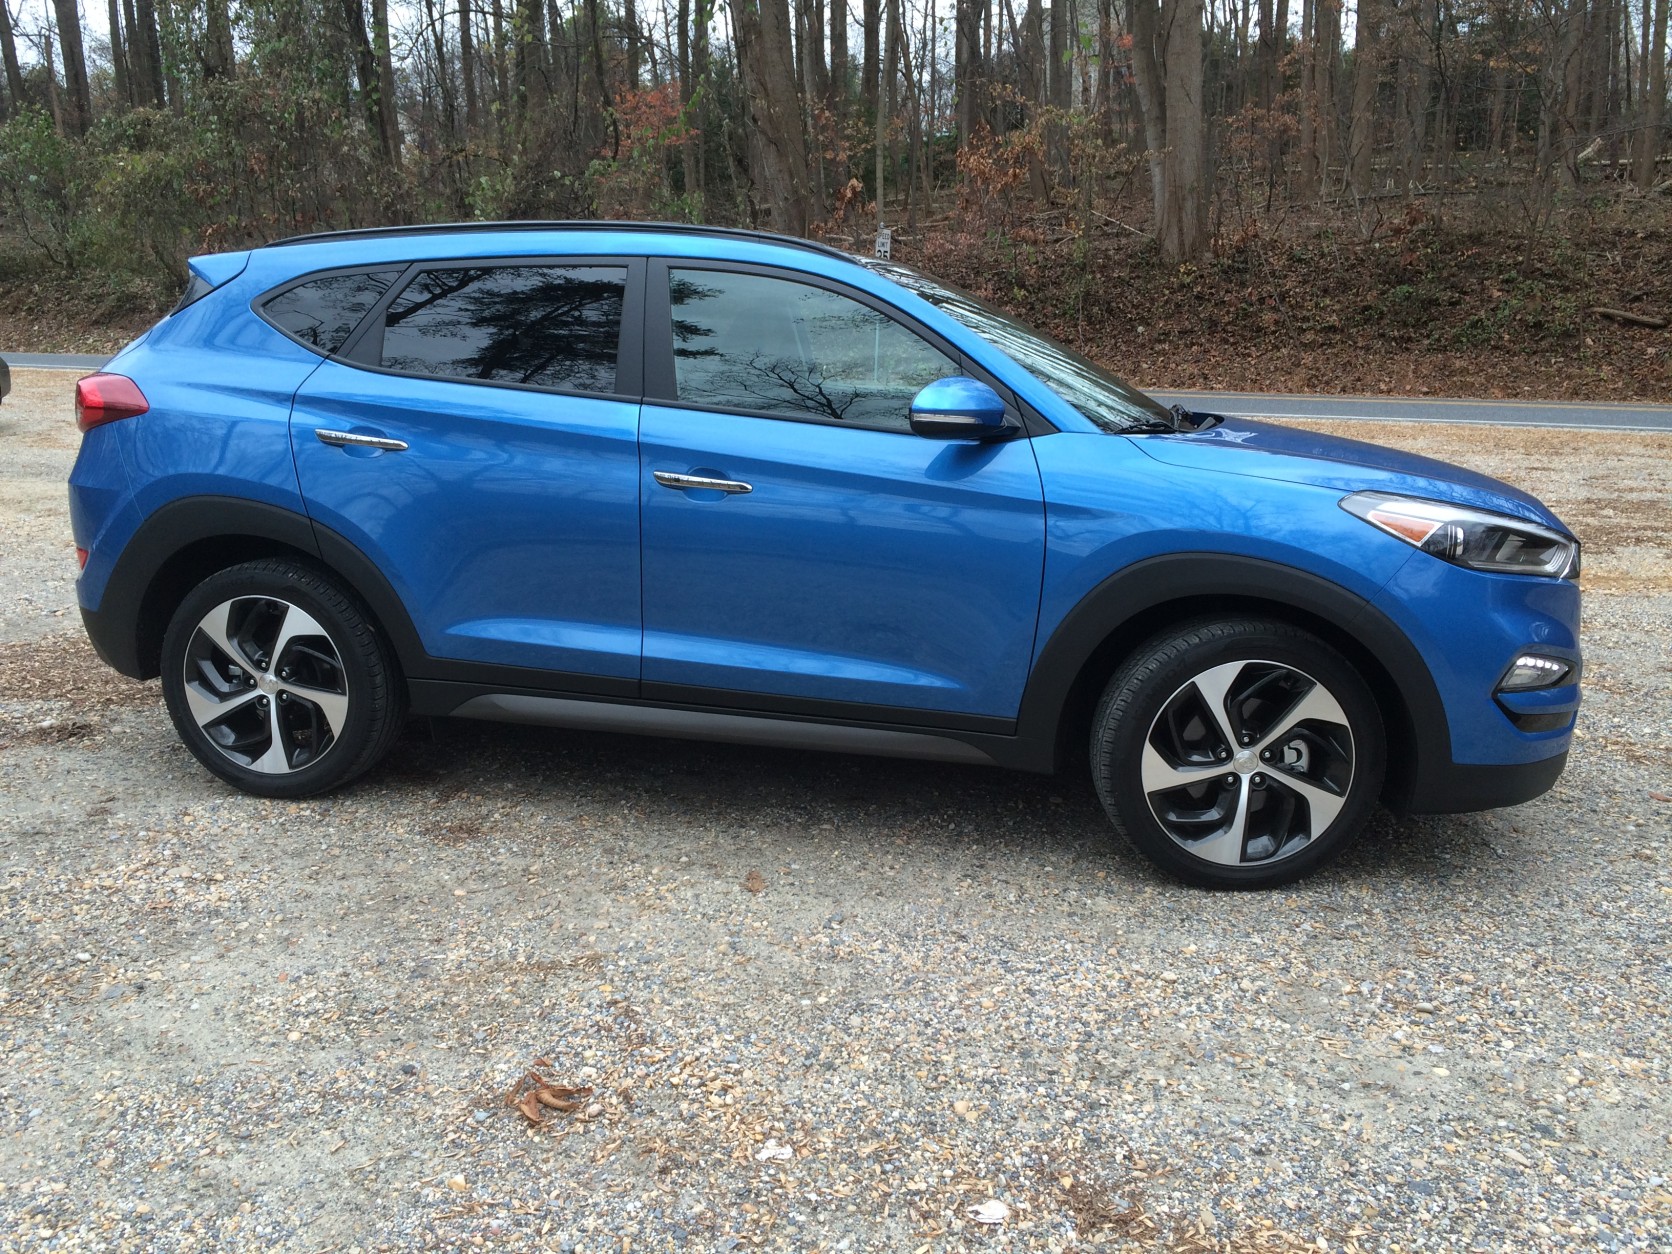 This year’s redesign brought the vehicle’s looks forward.  (WTOP/Mike Parris)